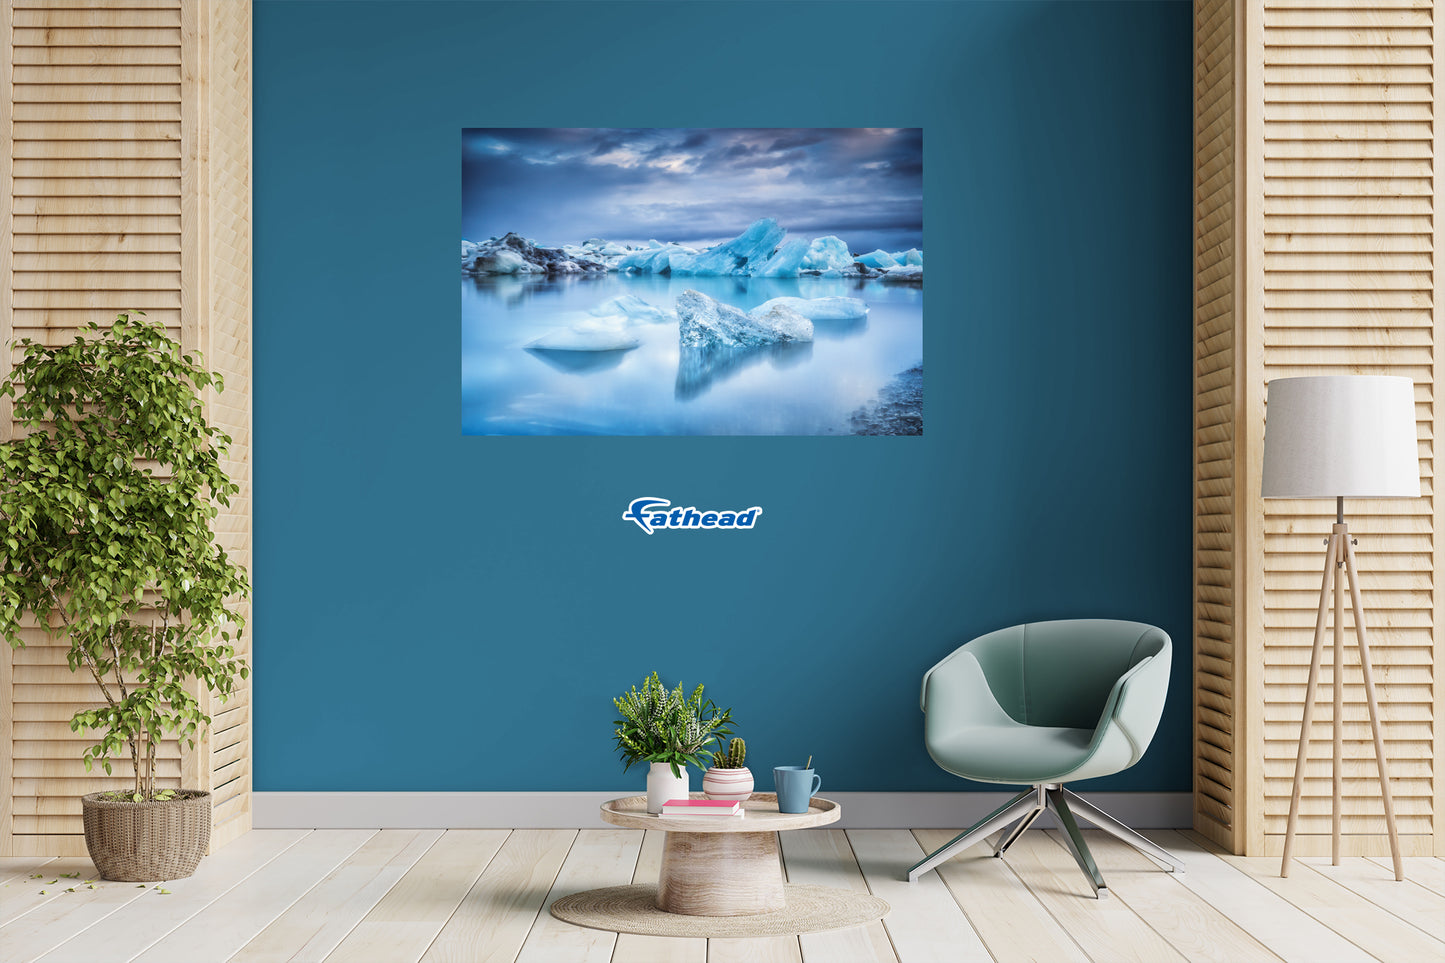 Generic Scenery: North Pole Poster        -   Removable     Adhesive Decal